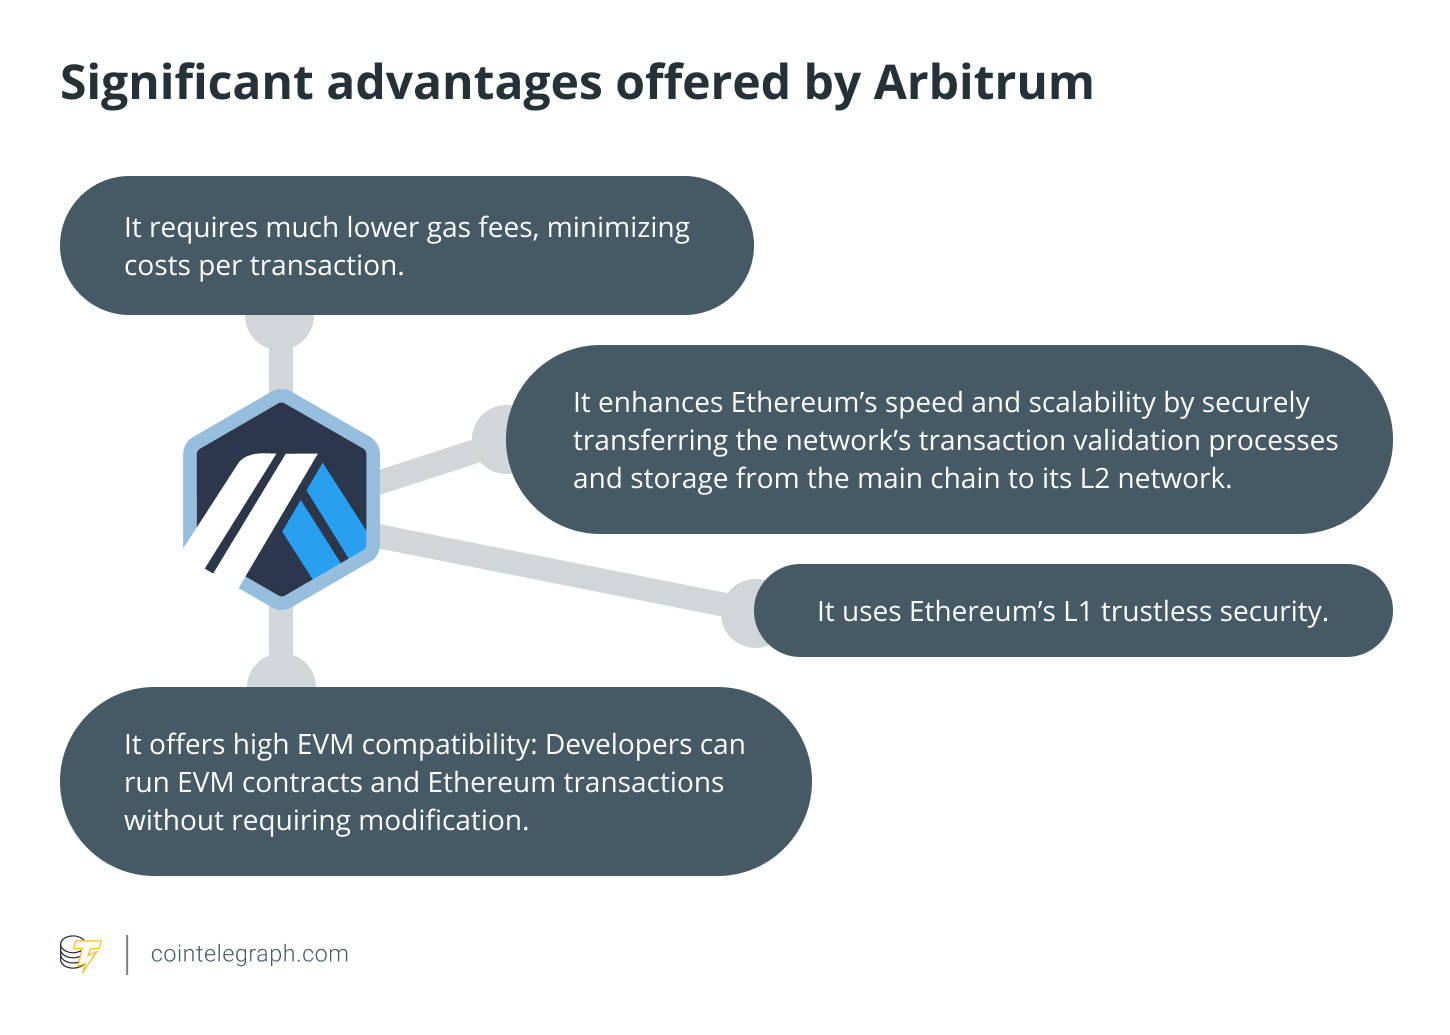 Significant advantages offered by Arbitrum